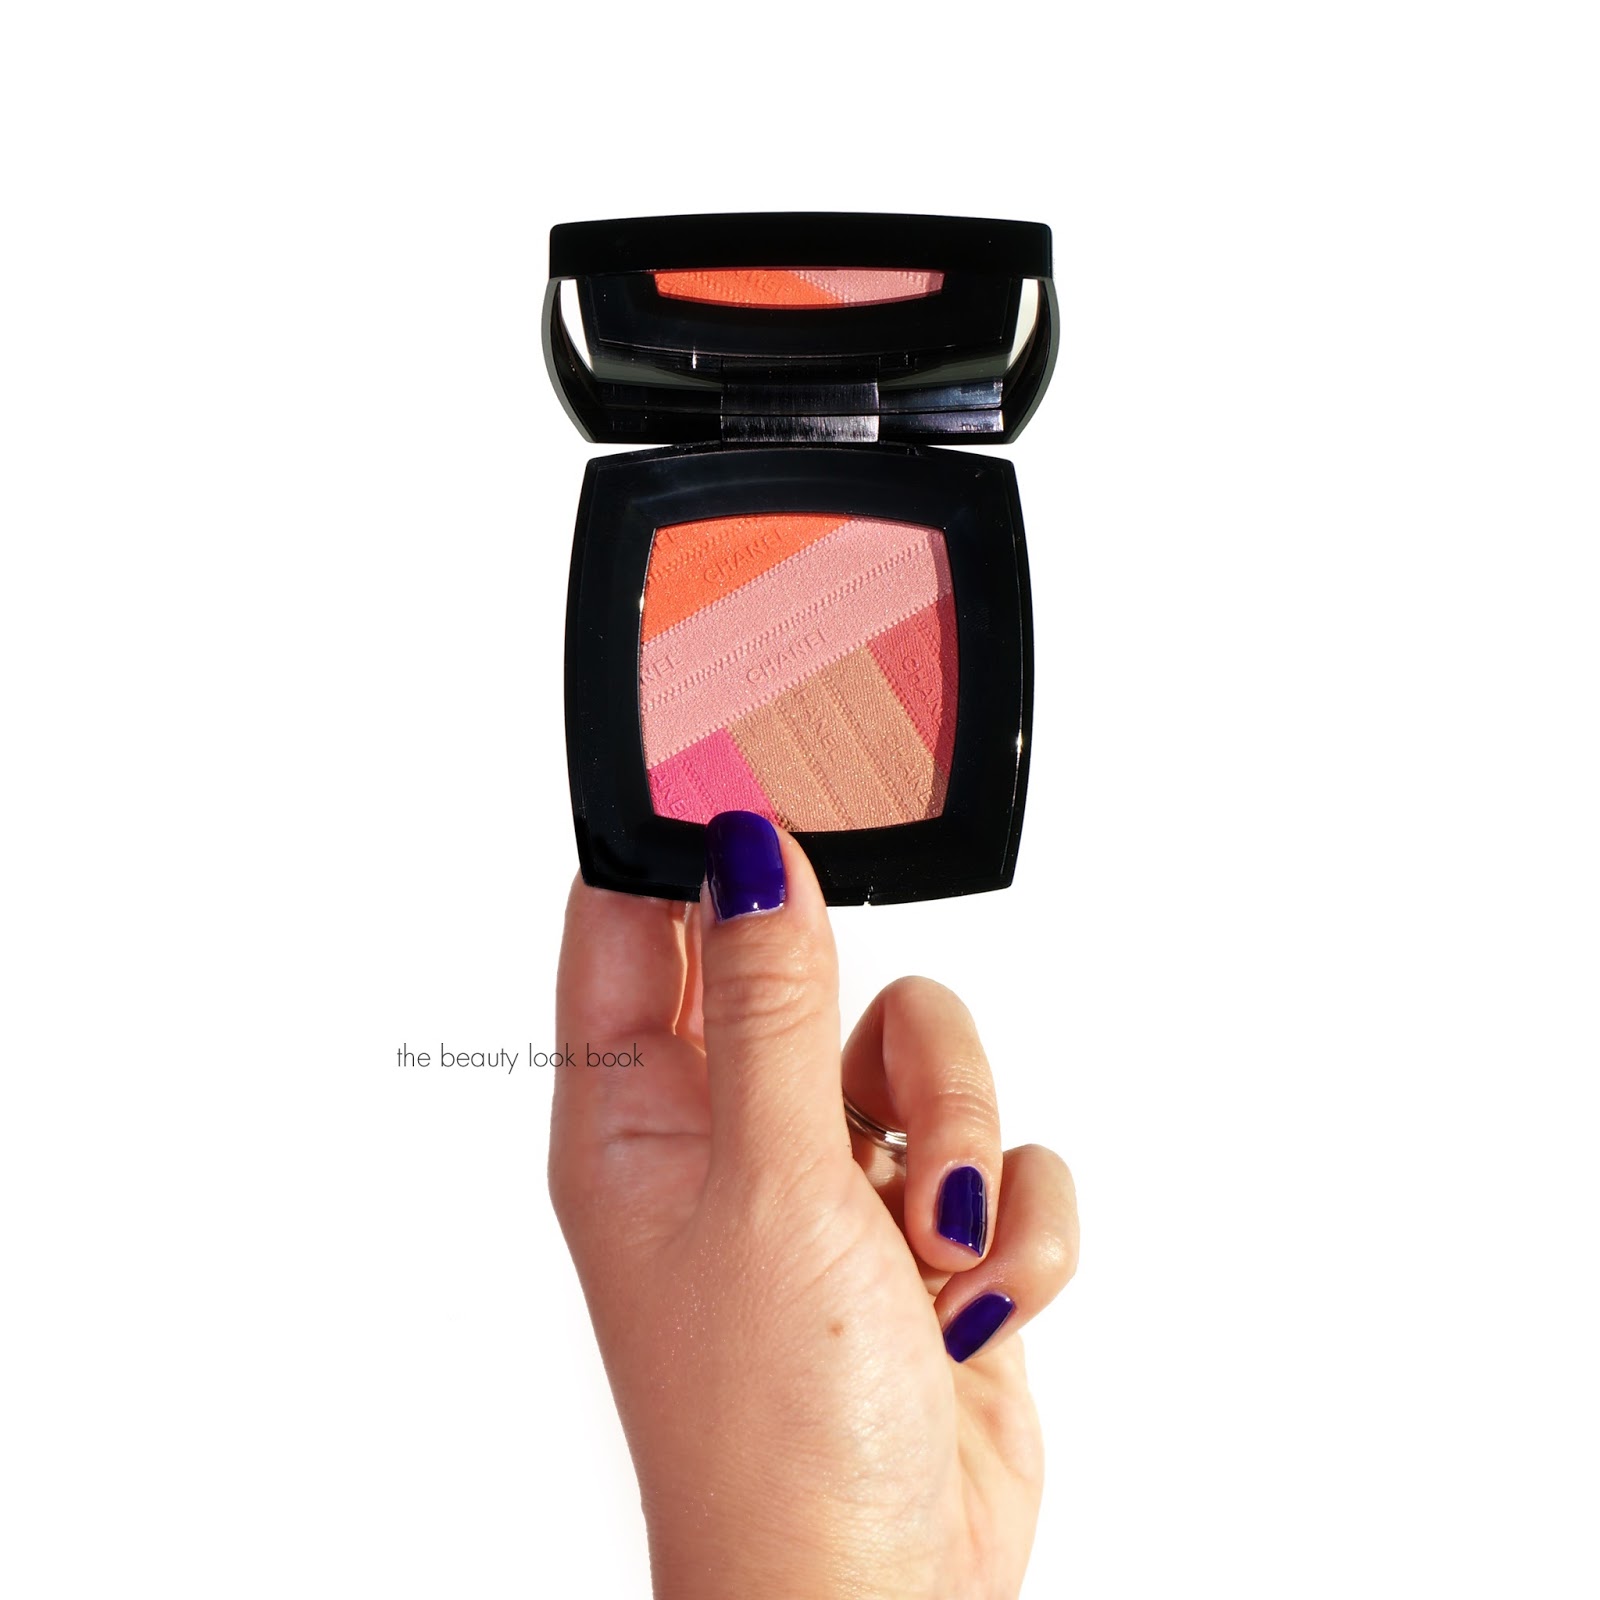 Chanel Collection L.A. Sunrise for Spring 2016 - The Beauty Look Book Picks  - The Beauty Look Book